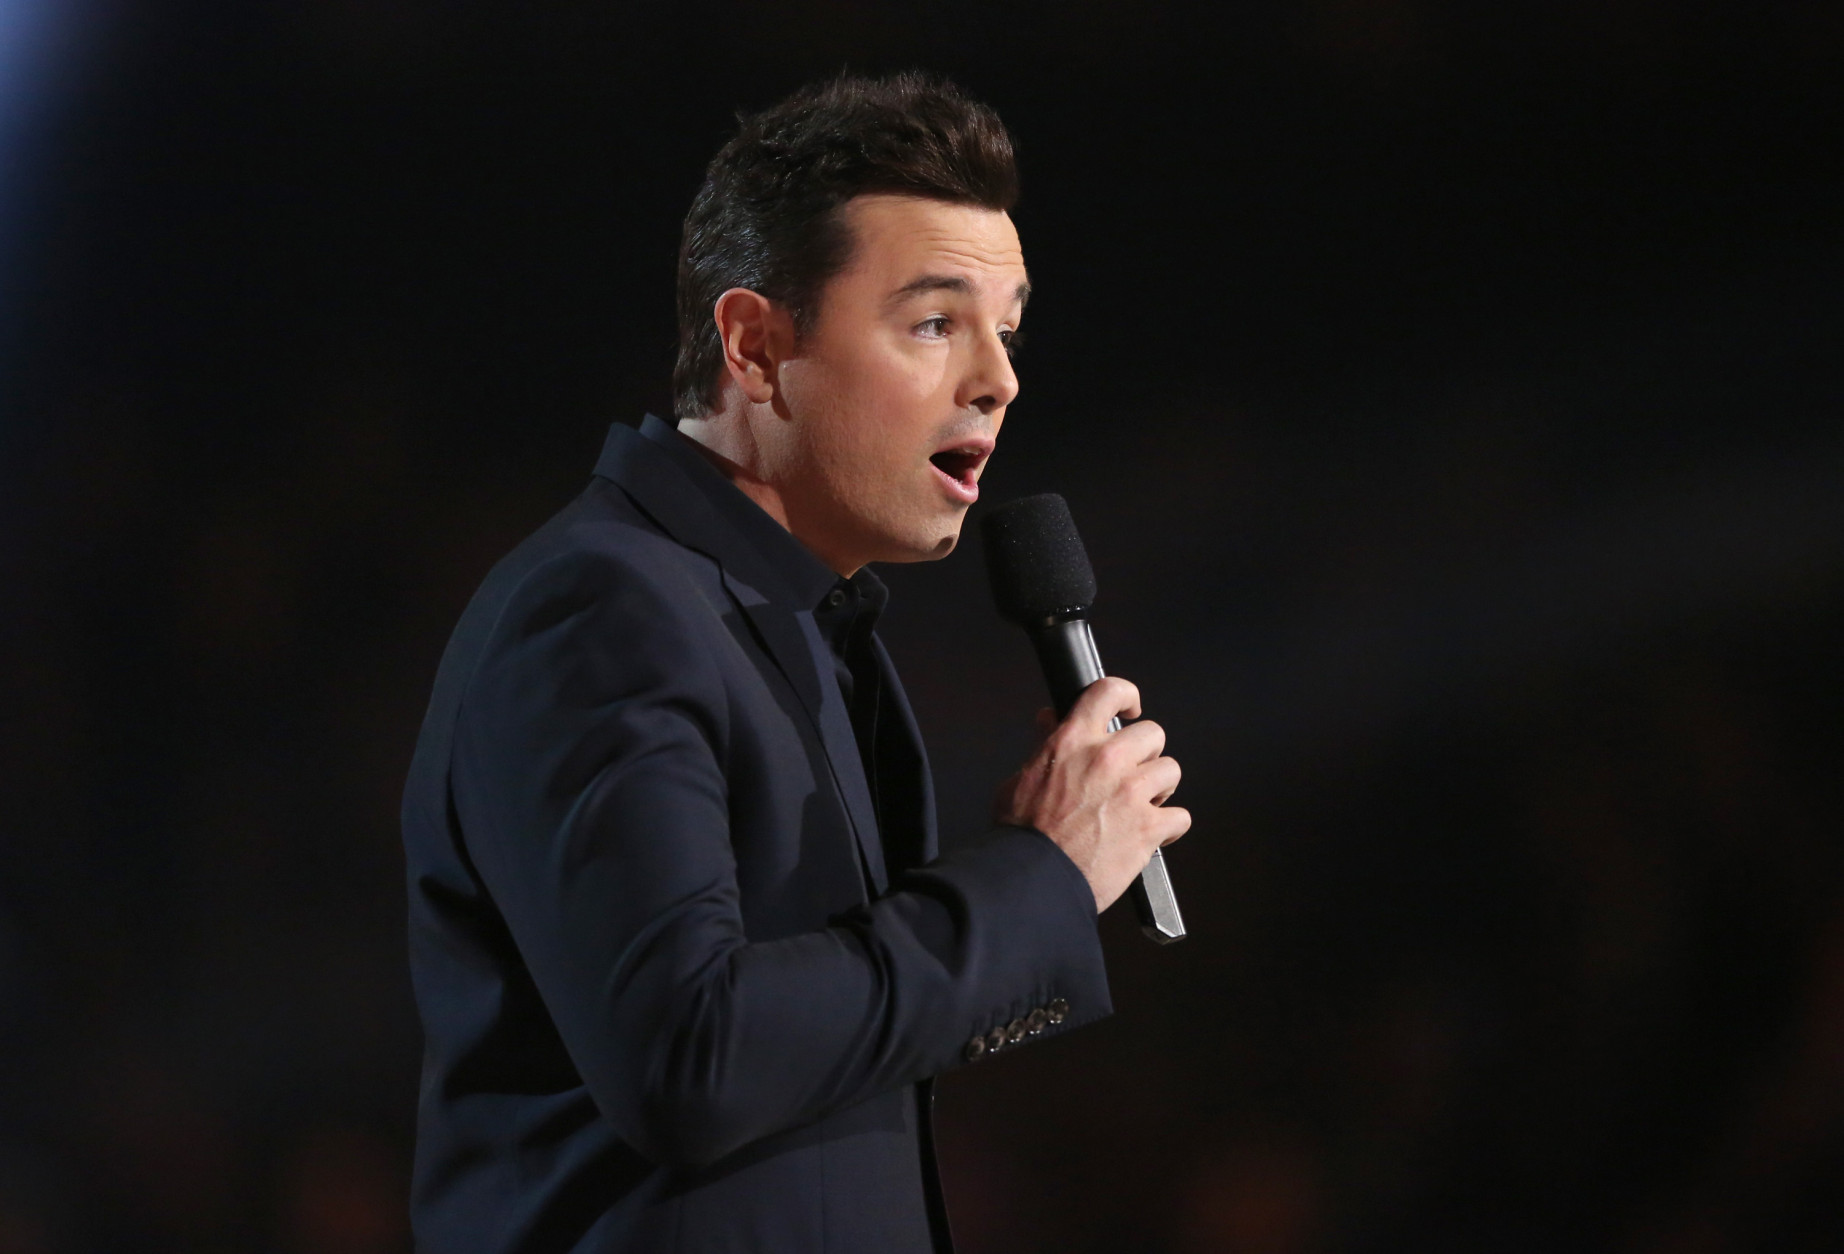 Seth MacFarlane presents the award for best musical theater album at the 58th annual Grammy Awards on Monday, Feb. 15, 2016, in Los Angeles. (Photo by Matt Sayles/Invision/AP)